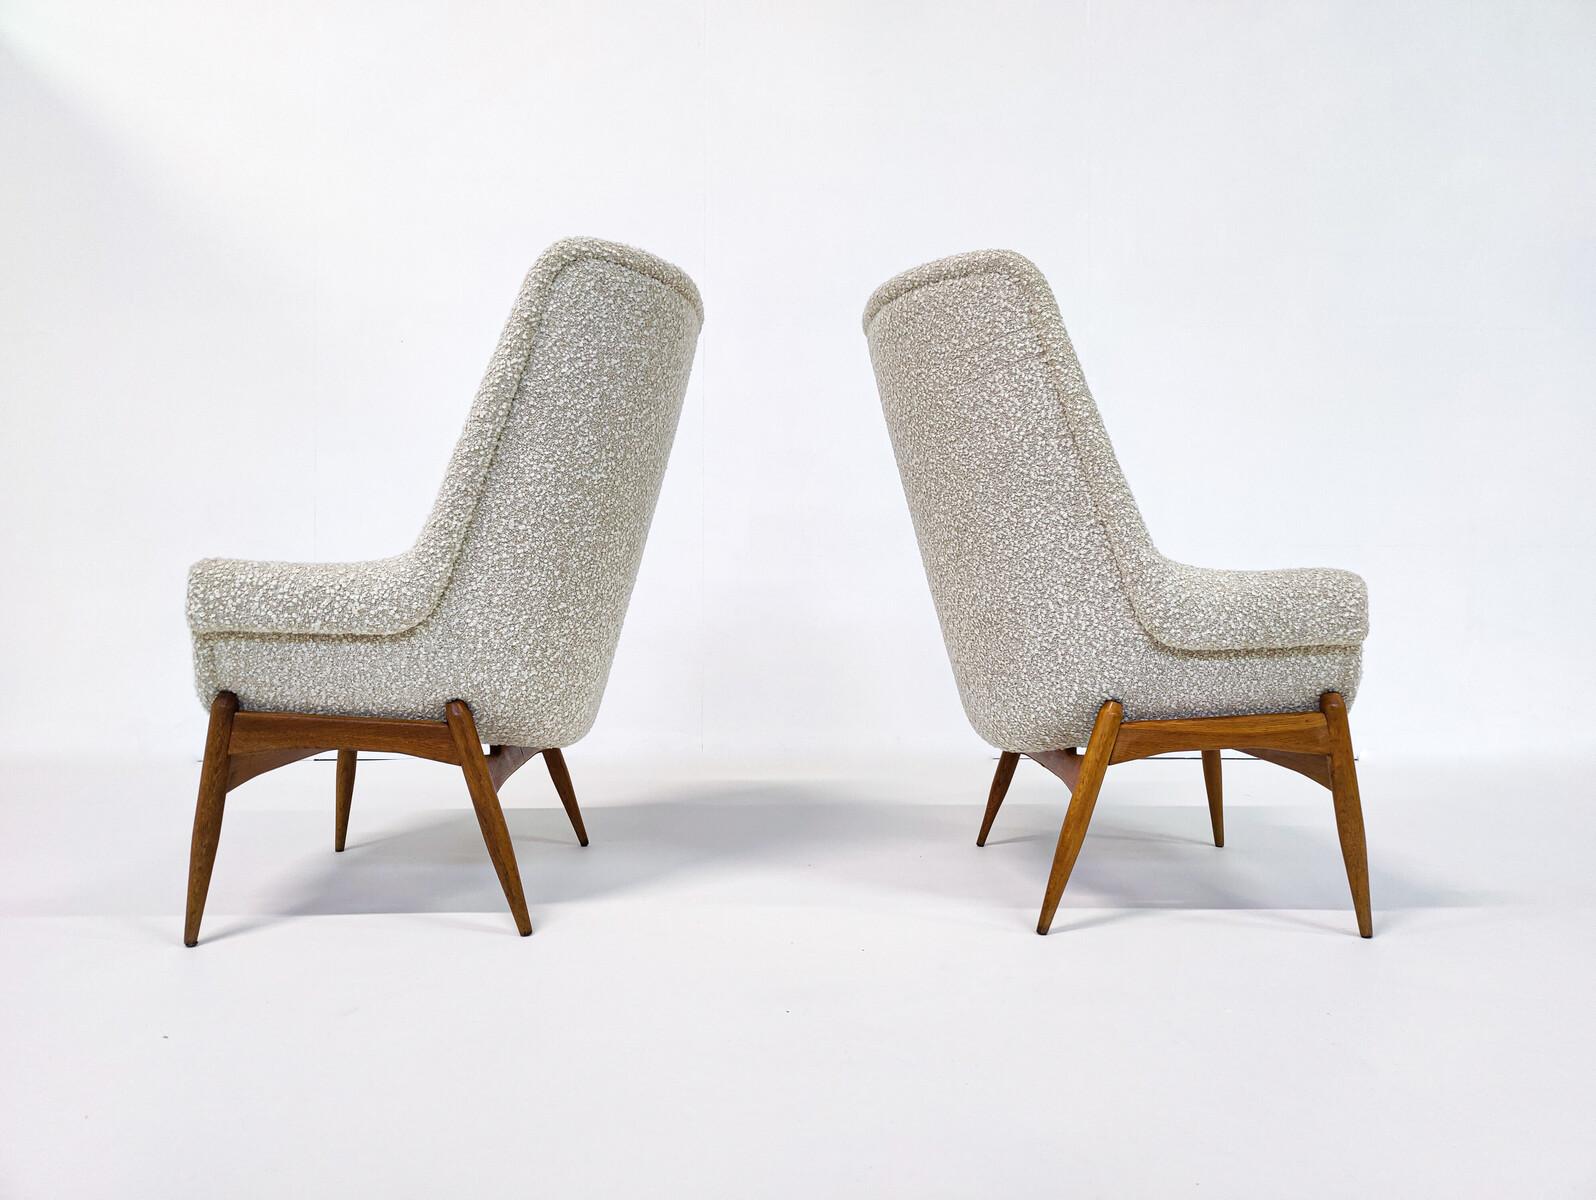 Pair of Mid-Century Modern Beige Fabric Armchairs by Julia Gaubek, Hungary, 1950 For Sale 1